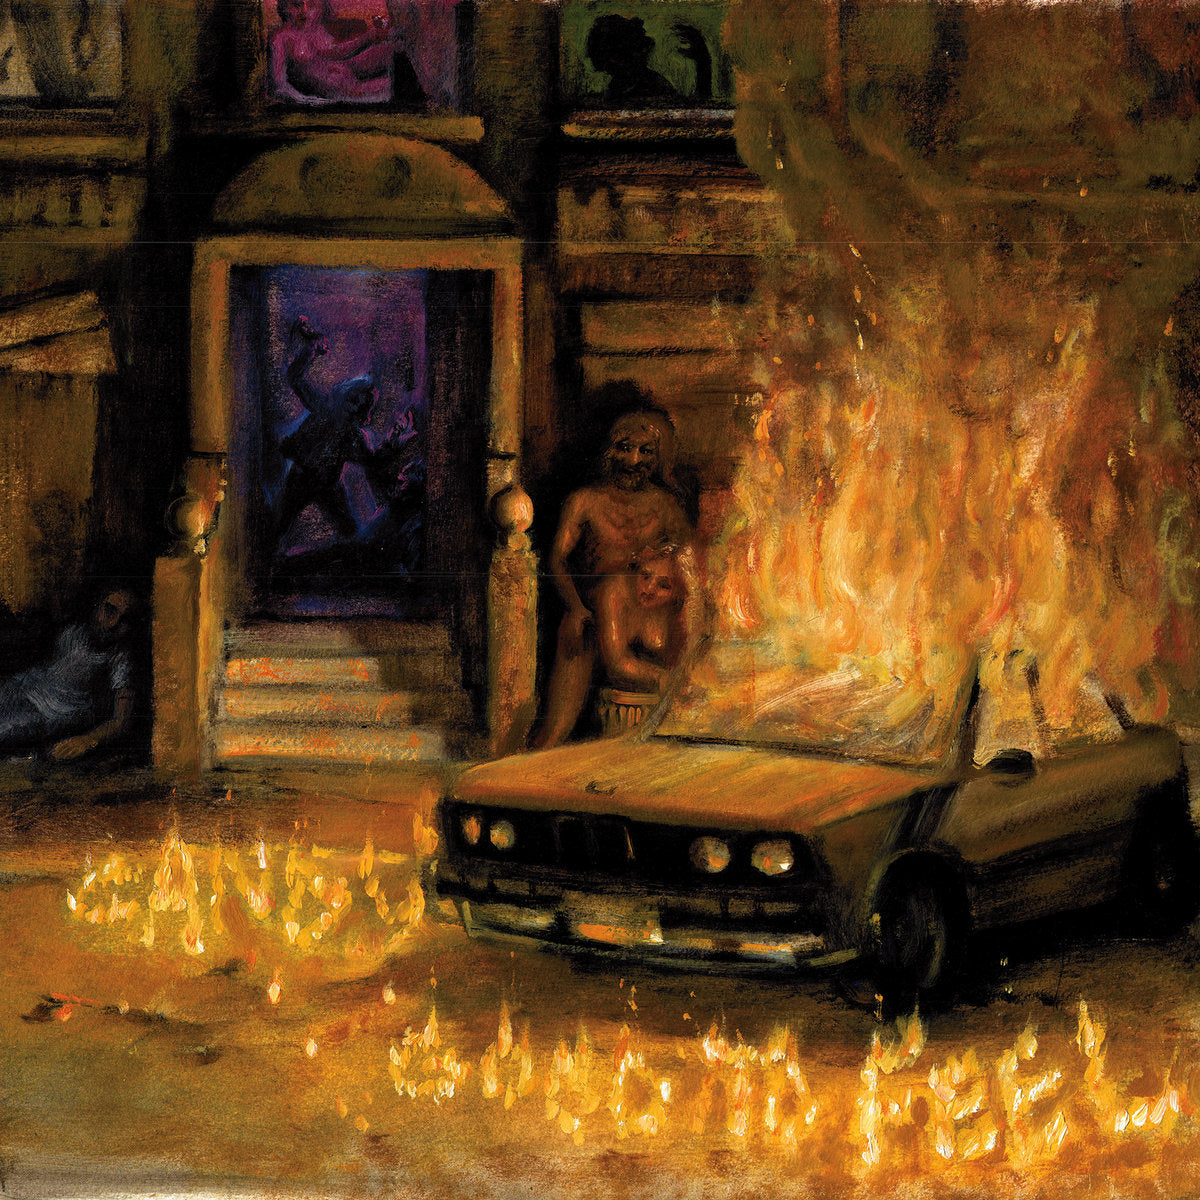 Candy  "Good To Feel" LP